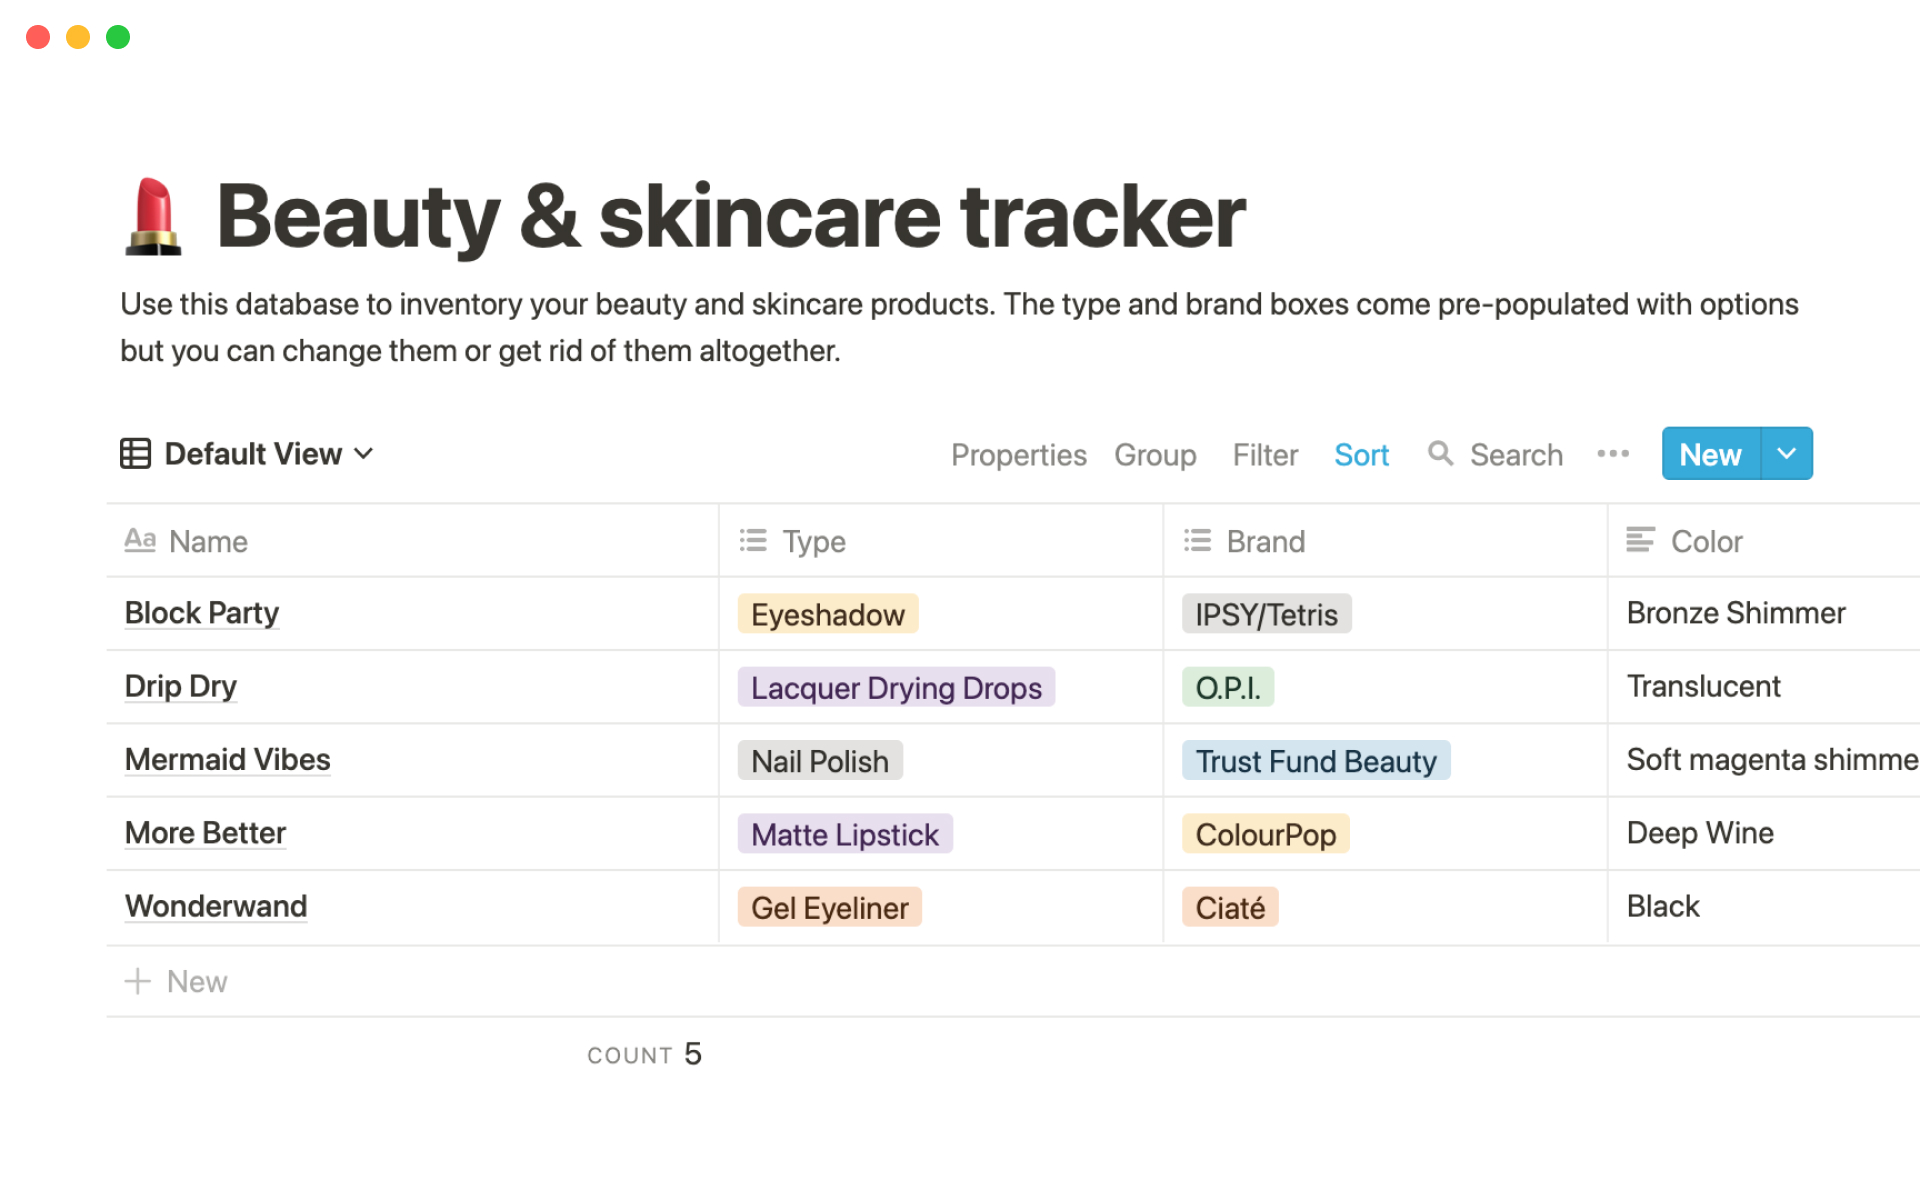 Keep track of all the beauty and skincare products you own.